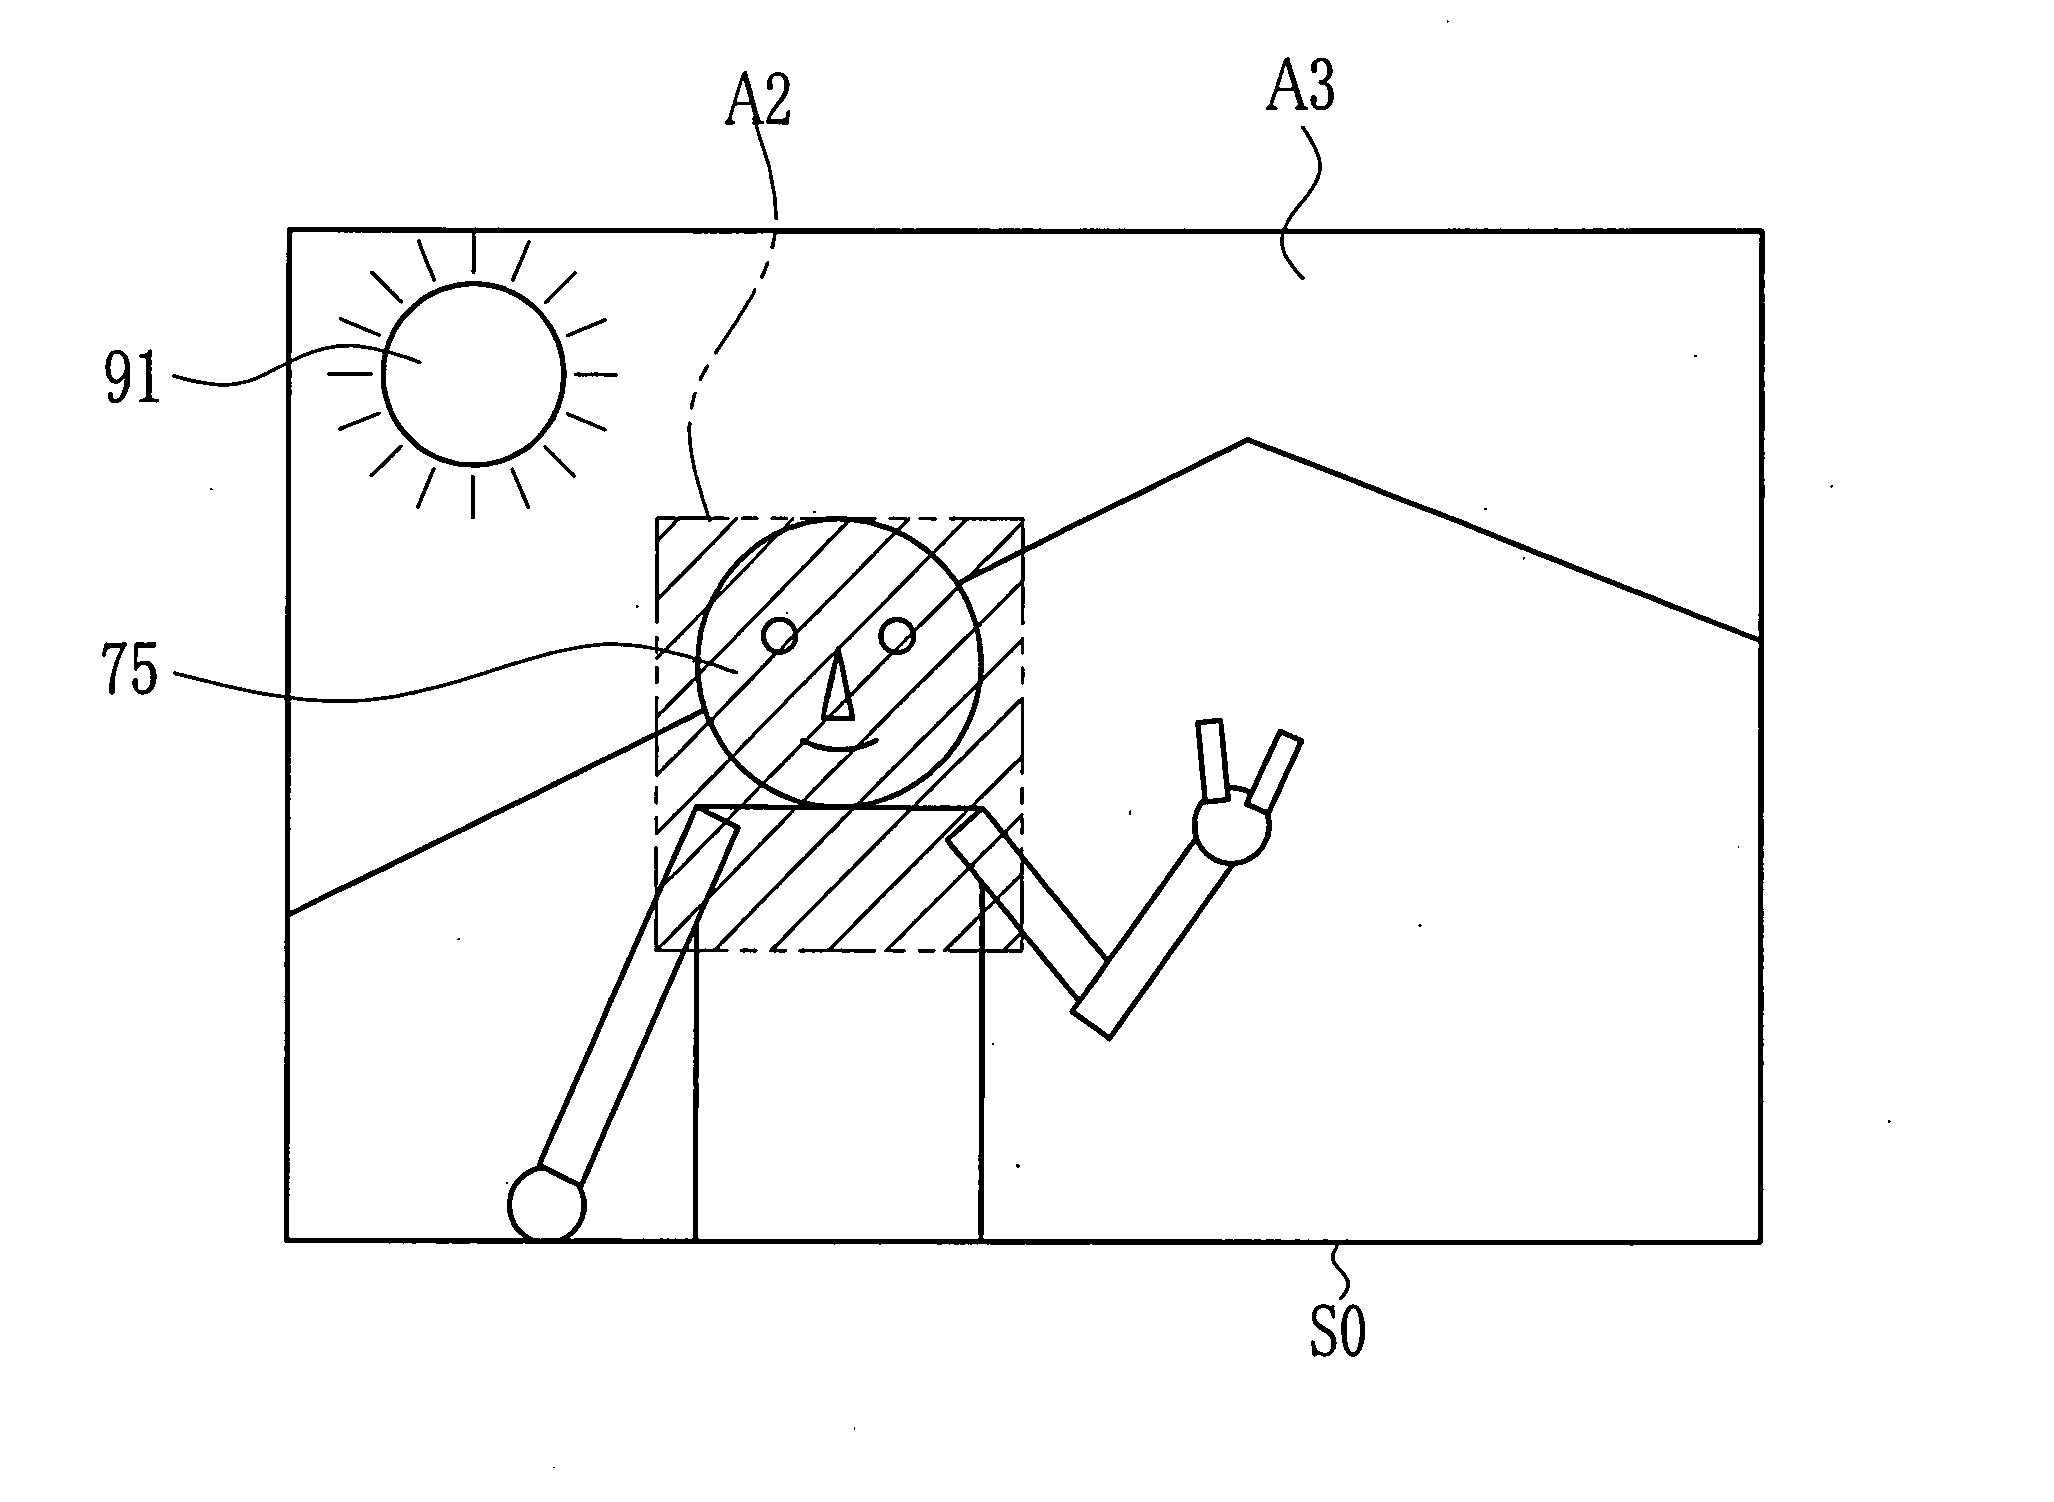 Image capturing apparatus with flash device